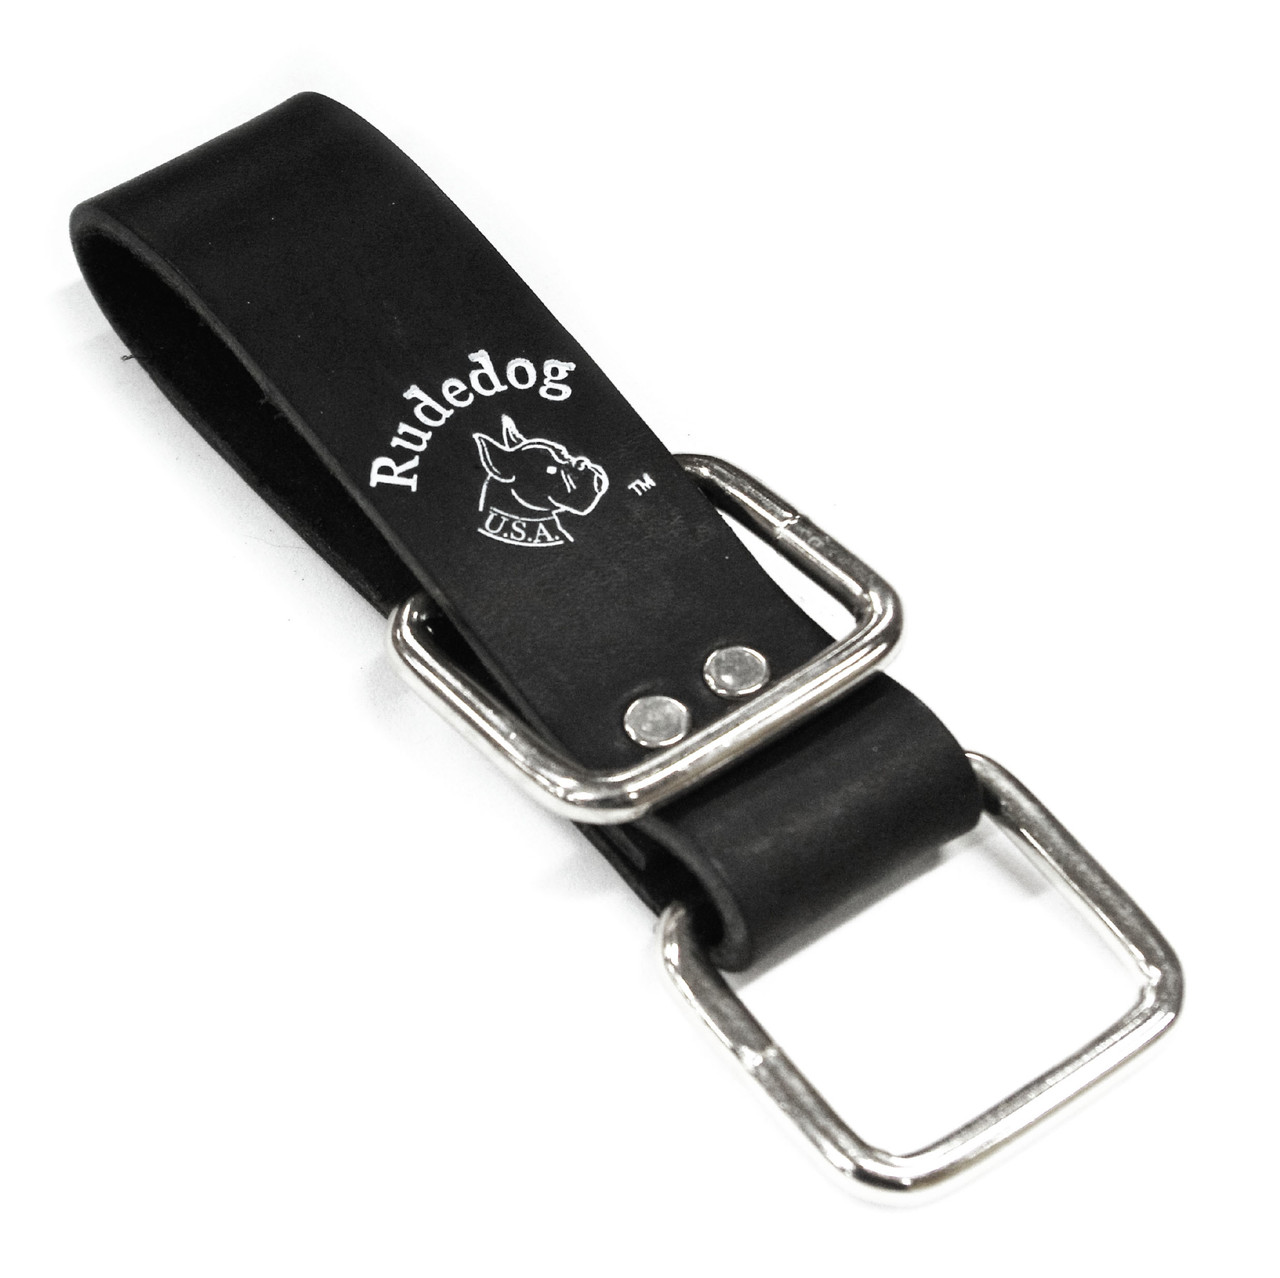 Rudedog Tool Lanyard Tether Holder from GME Supply